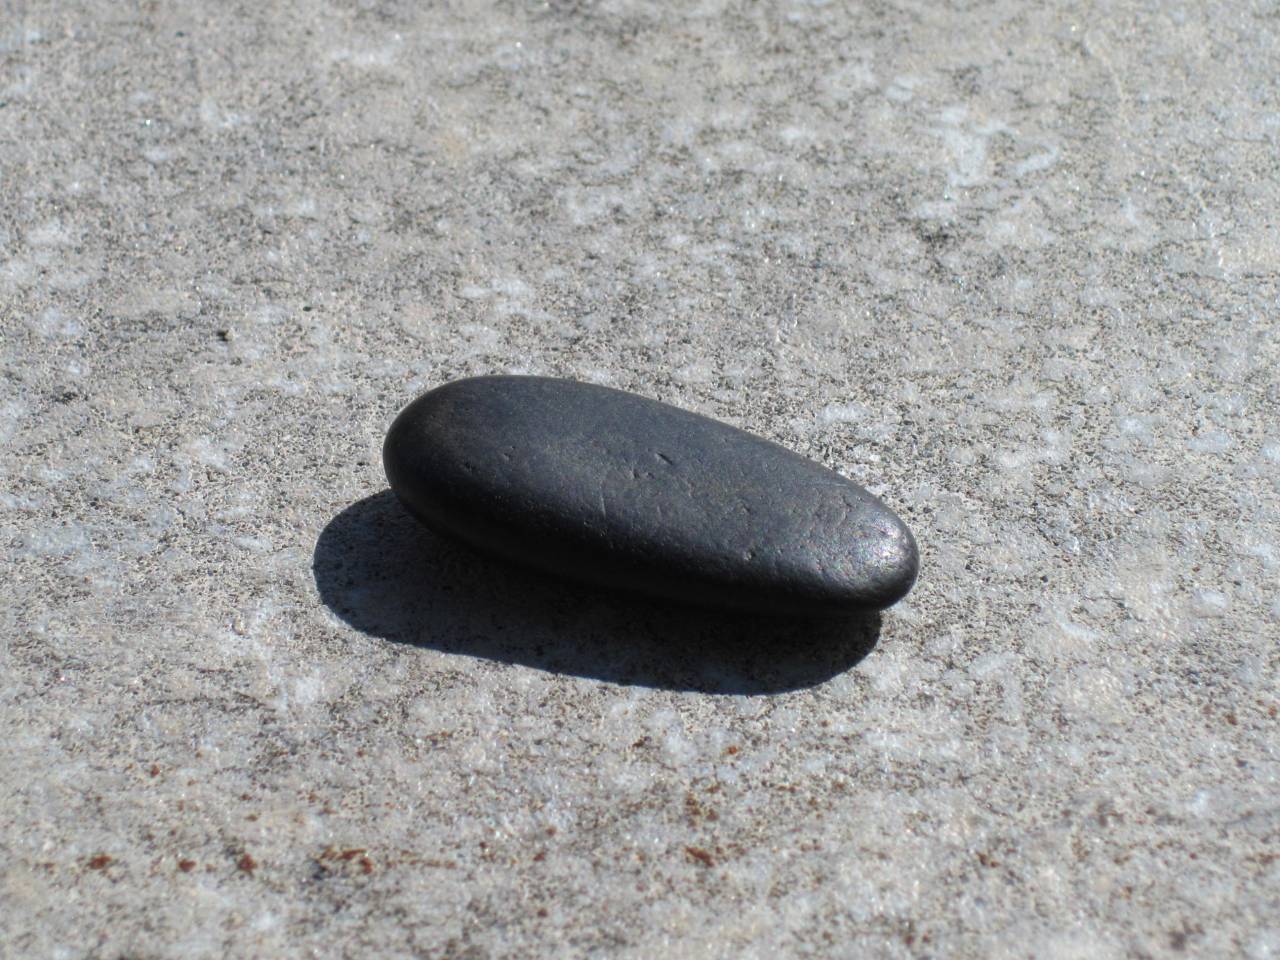 My #1 primitive survival tool: the rock in my pocket.